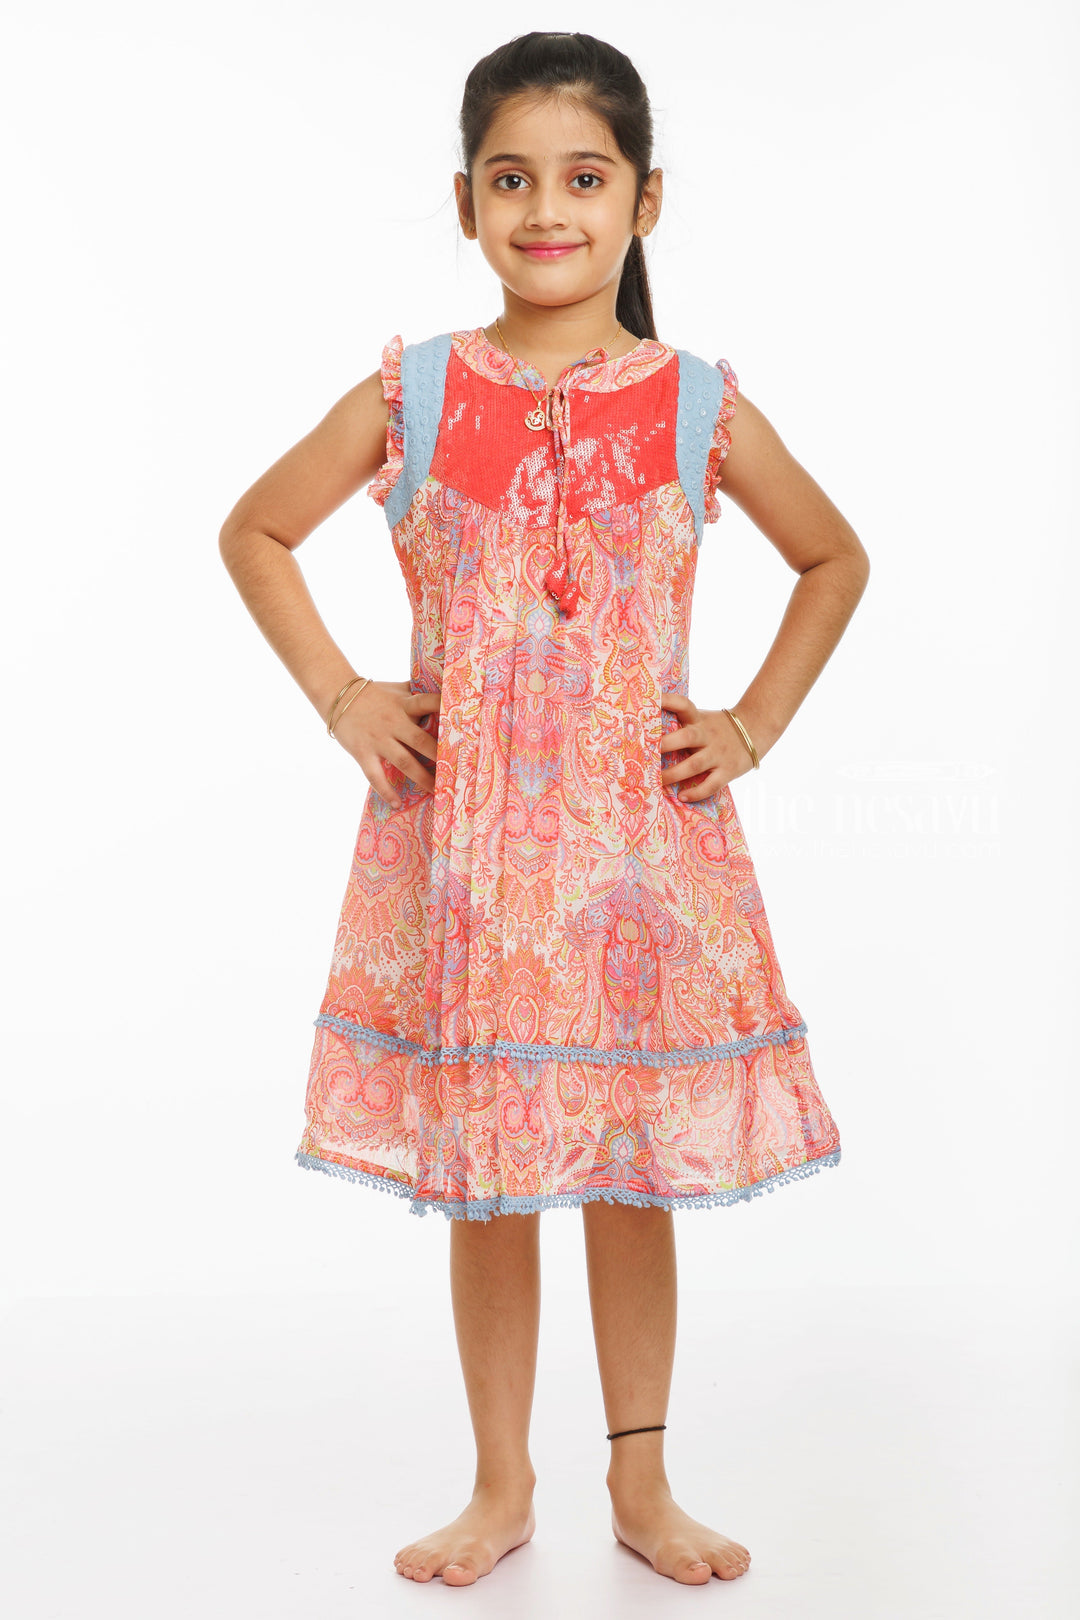 The Nesavu Girls Fancy Frock Radiant Paisley Parade: Colorful Cotton Frock for Trendy Tots Nesavu 22 (4Y) / Red / Cotton GFC1300A-22 Shop the Latest Girls Paisley Cotton Frocks | Perfect for Any Occasion | The Nesavu